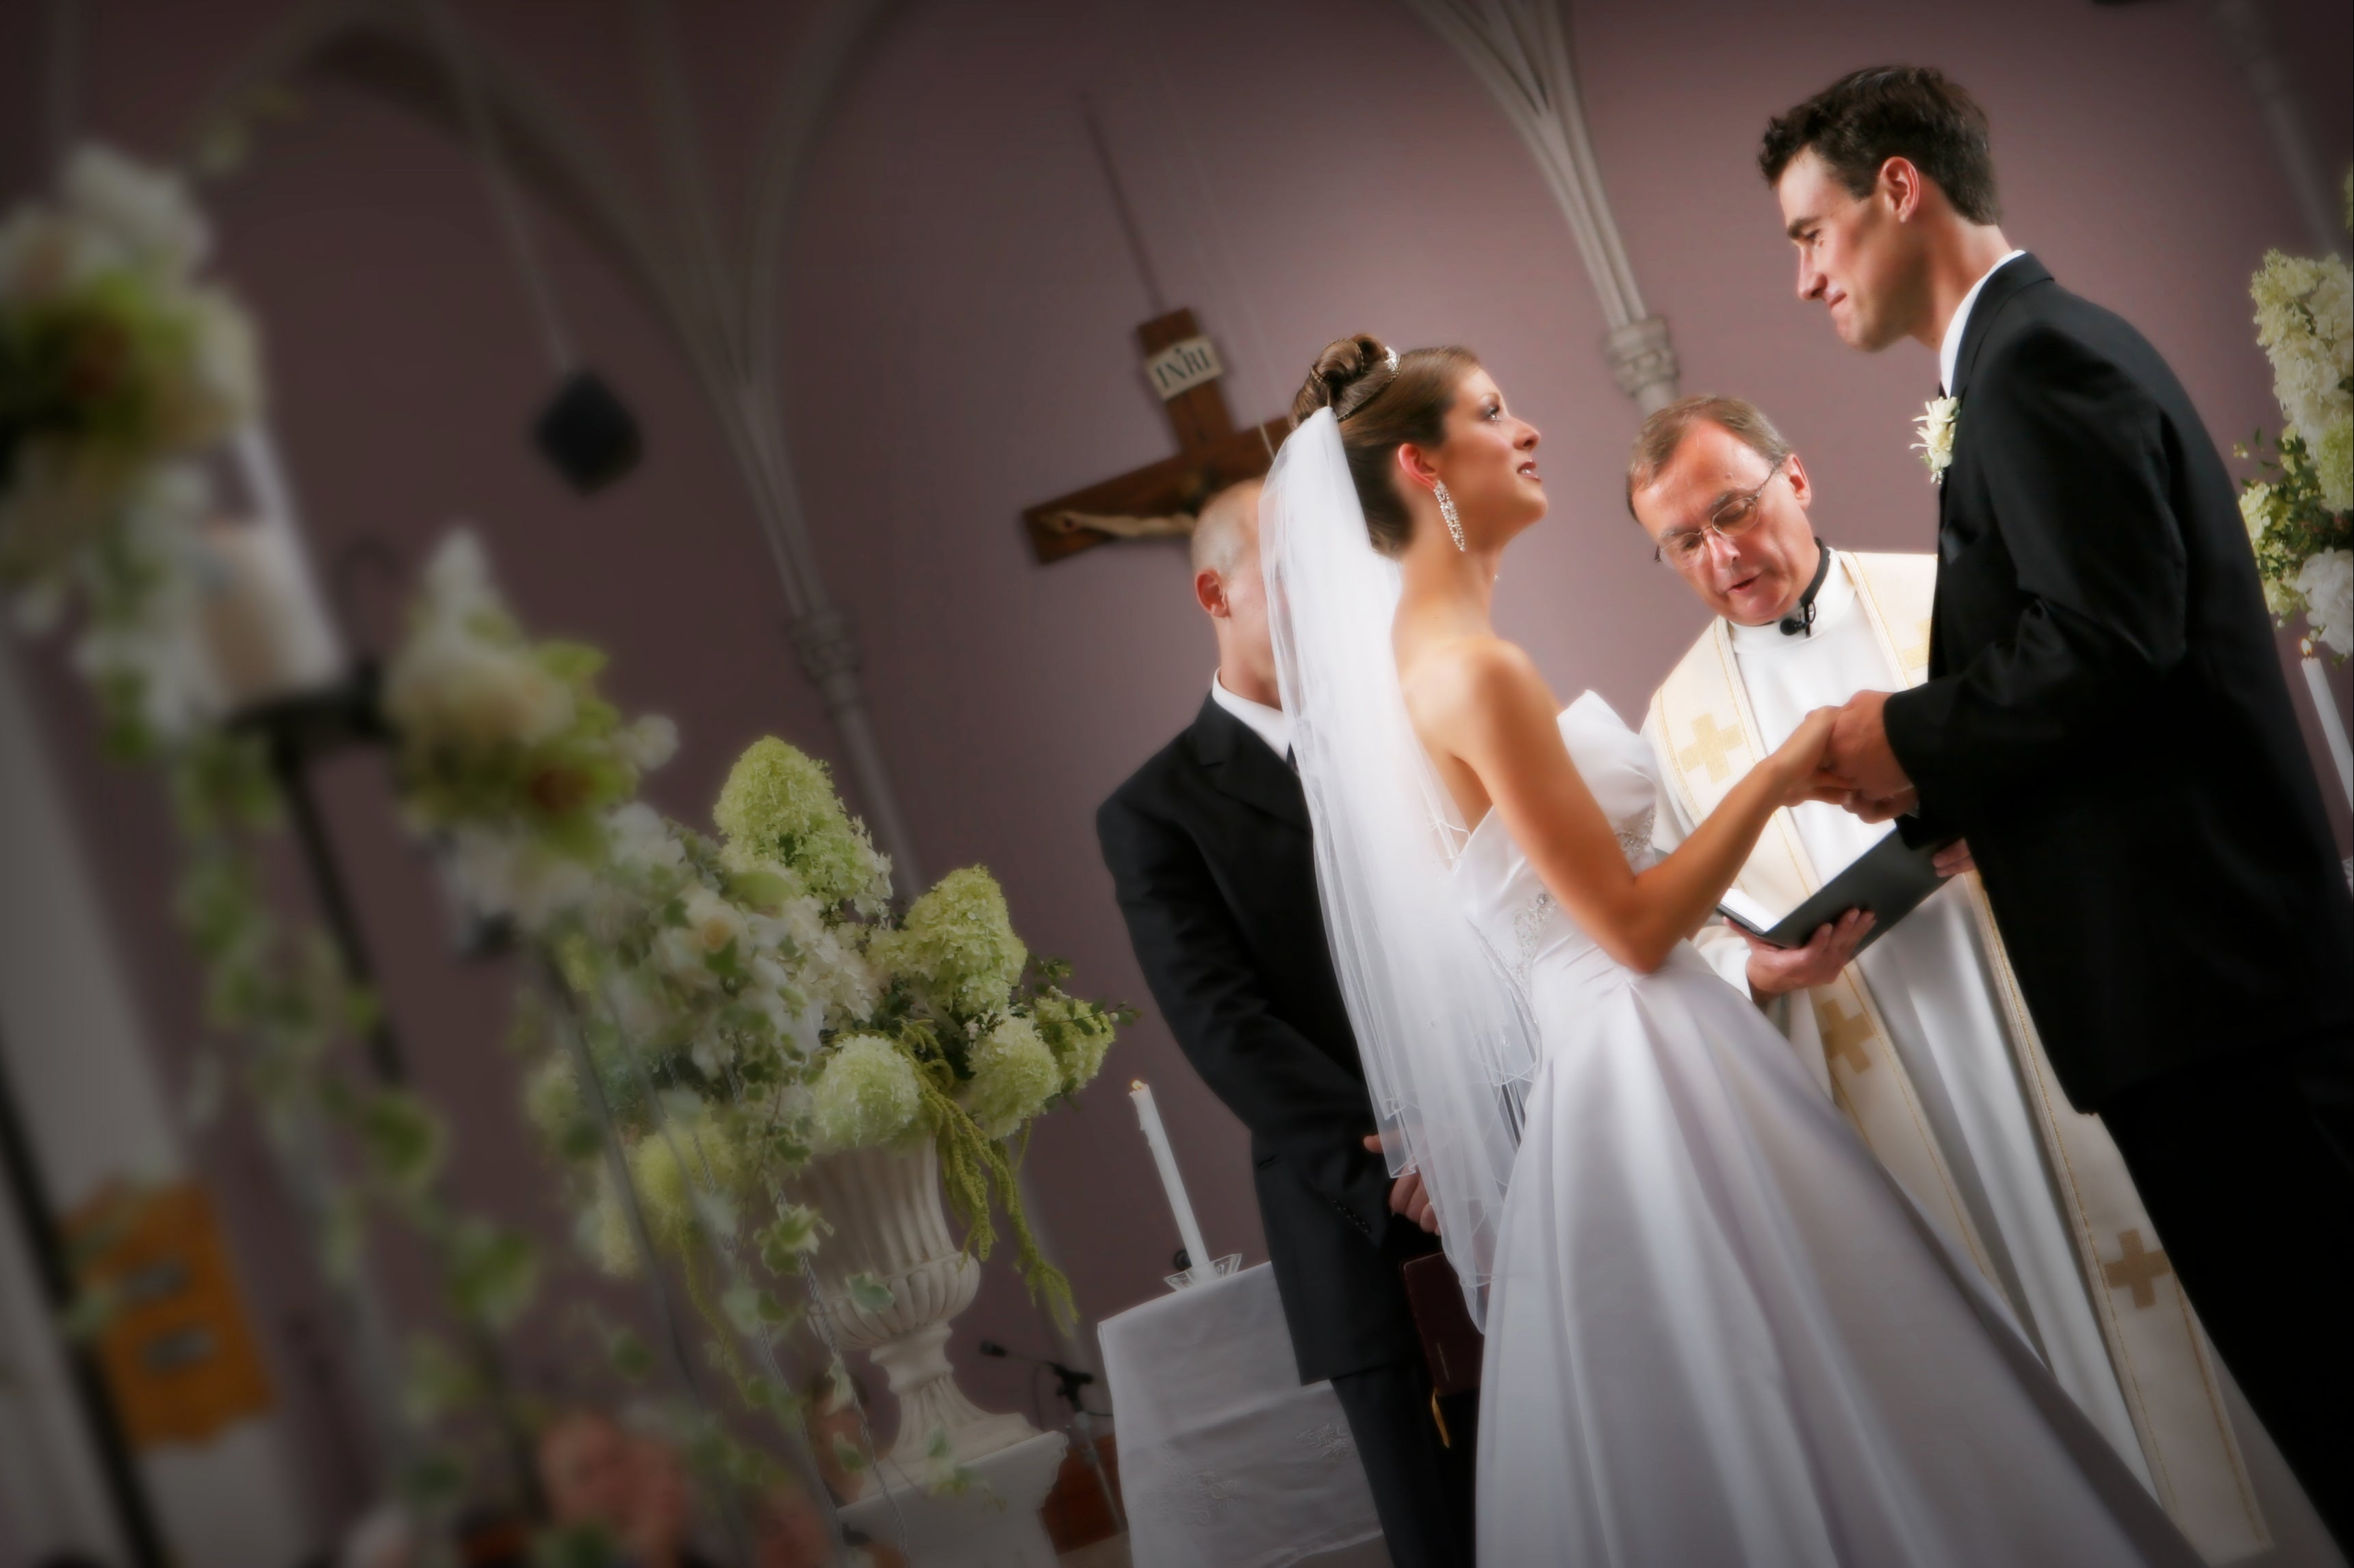 Row: friction between wedding photographers and vicars has boiled over